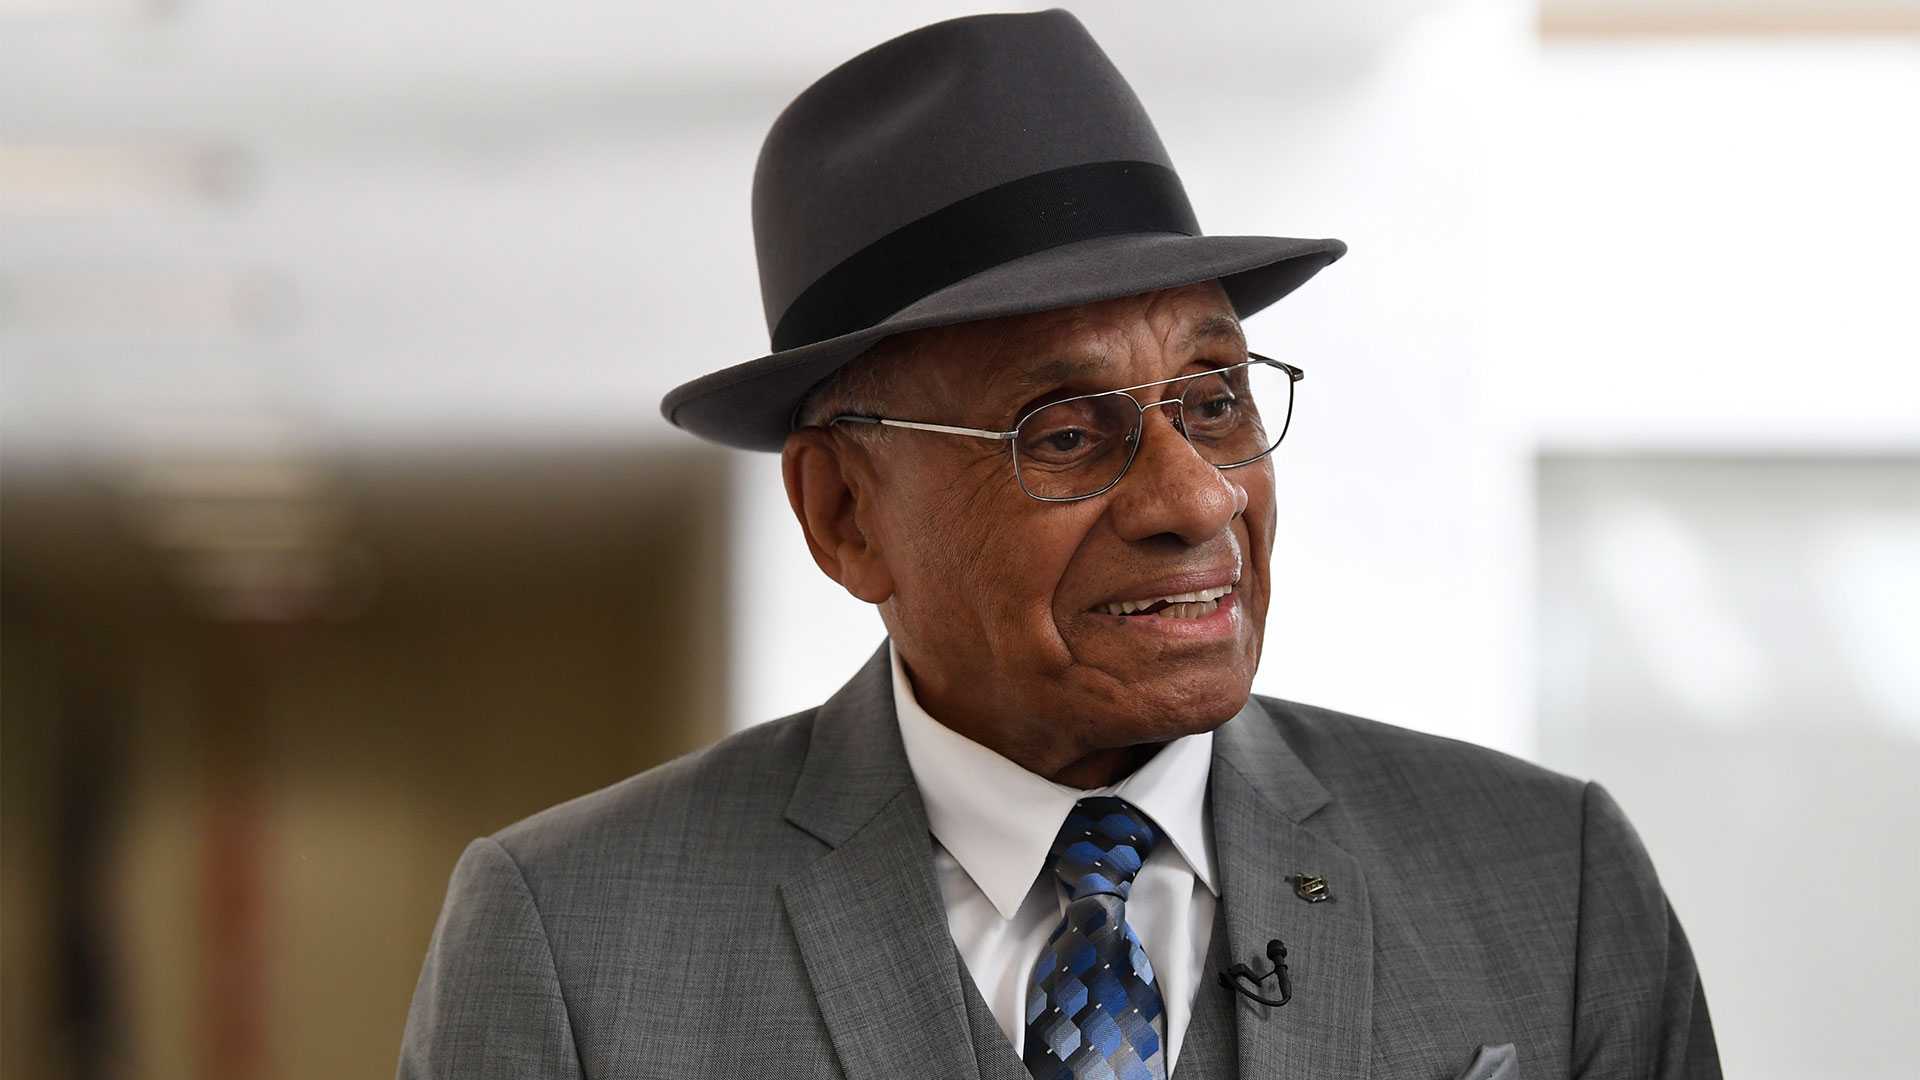 I've been blessed': Willie O'Ree's new book reflects on his time as the  NHL's first Black player - The Globe and Mail